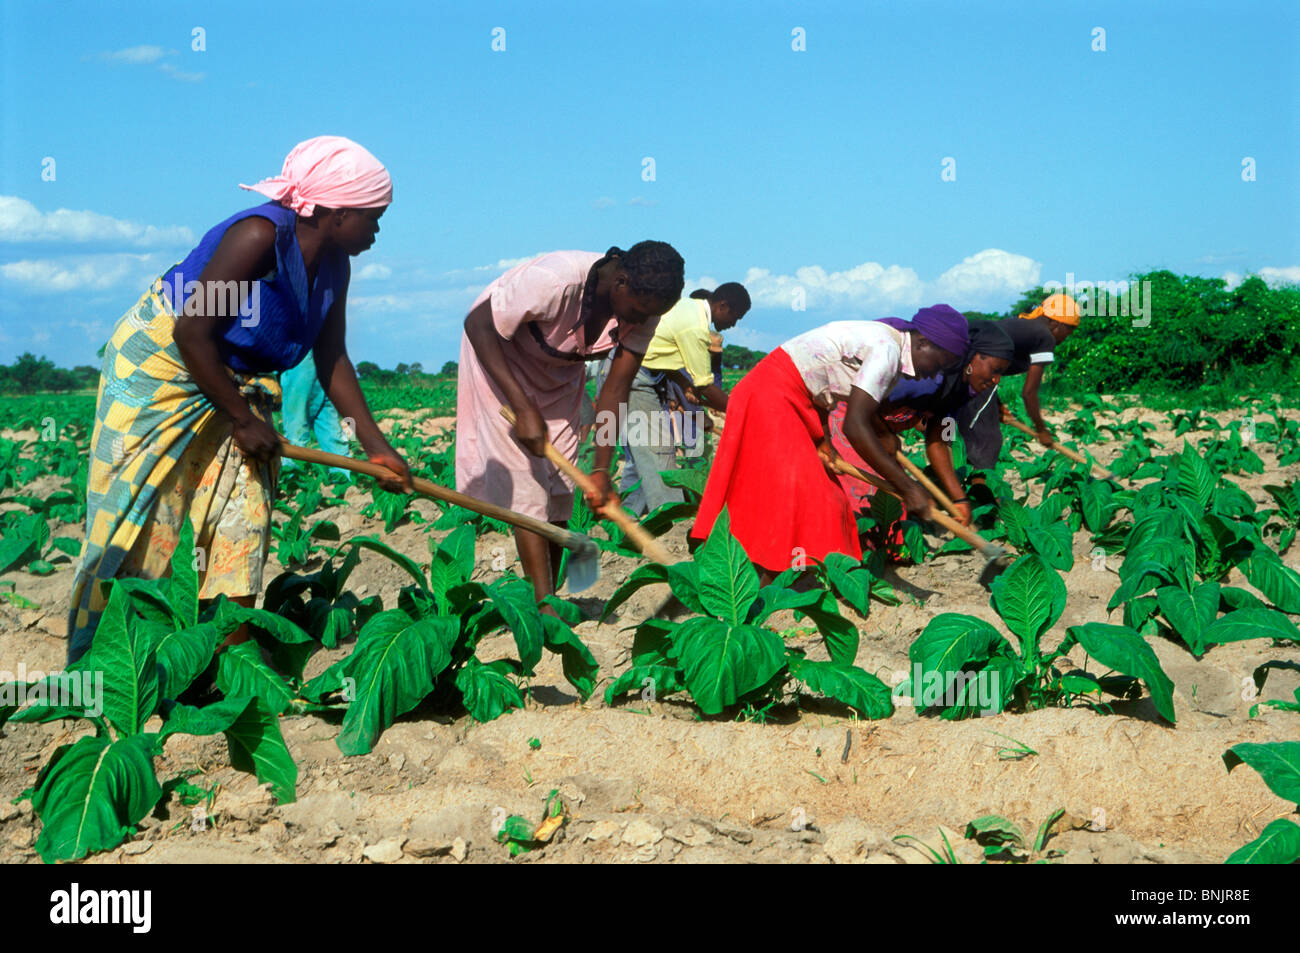 African men and women hoeing amid rows of tobacco plants on plantation in Zimbabwe Stock Photo